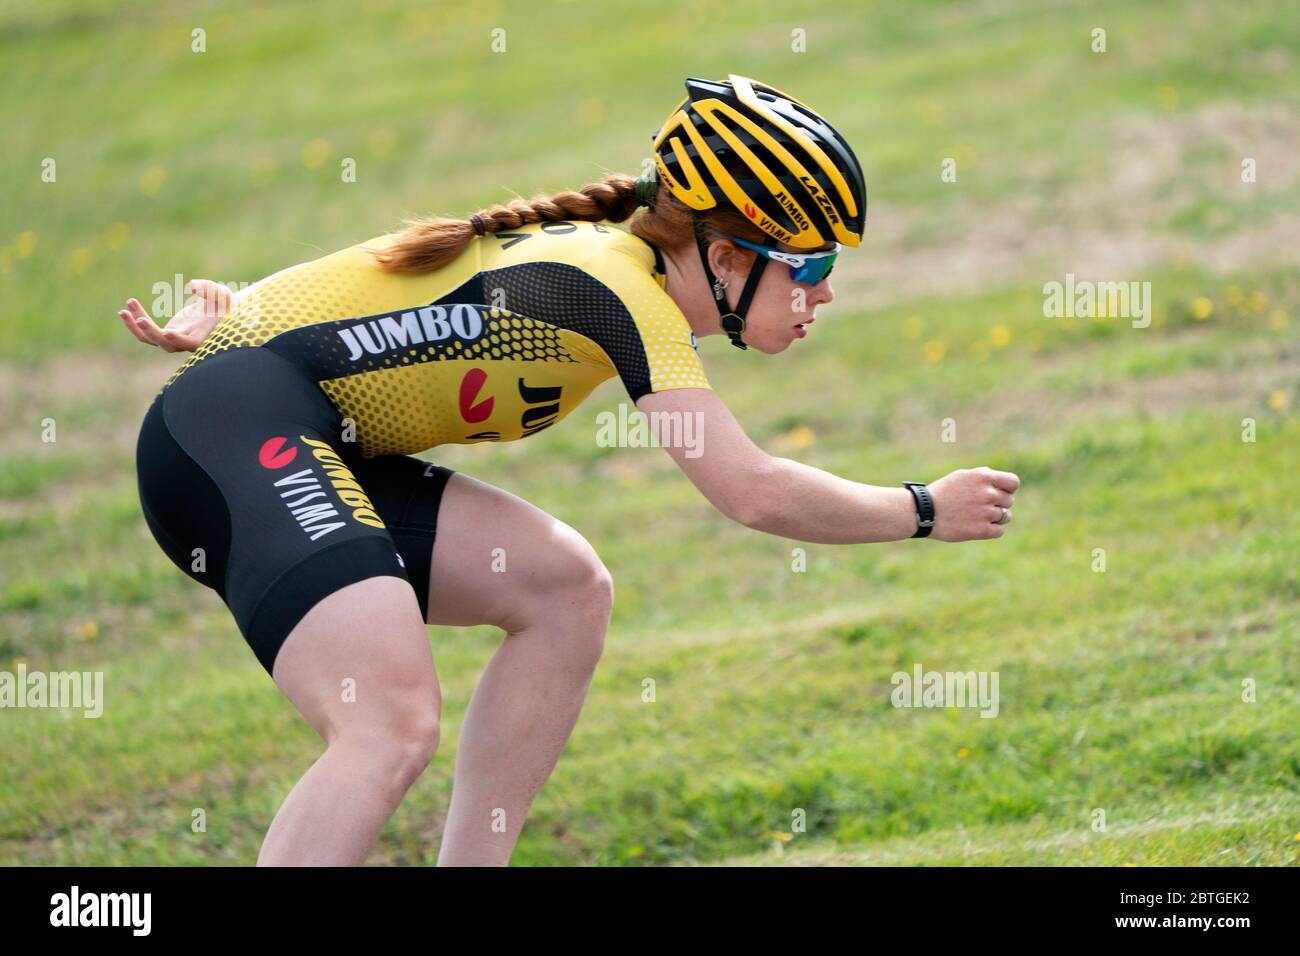 WOLVEGA, NETHERLANDS - MAY 20: Antoinette de Jong seen during the training  session of Jumbo Visma speed skating team on May 20, 2020 in Wolvega, The  Netherlands Stock Photo - Alamy